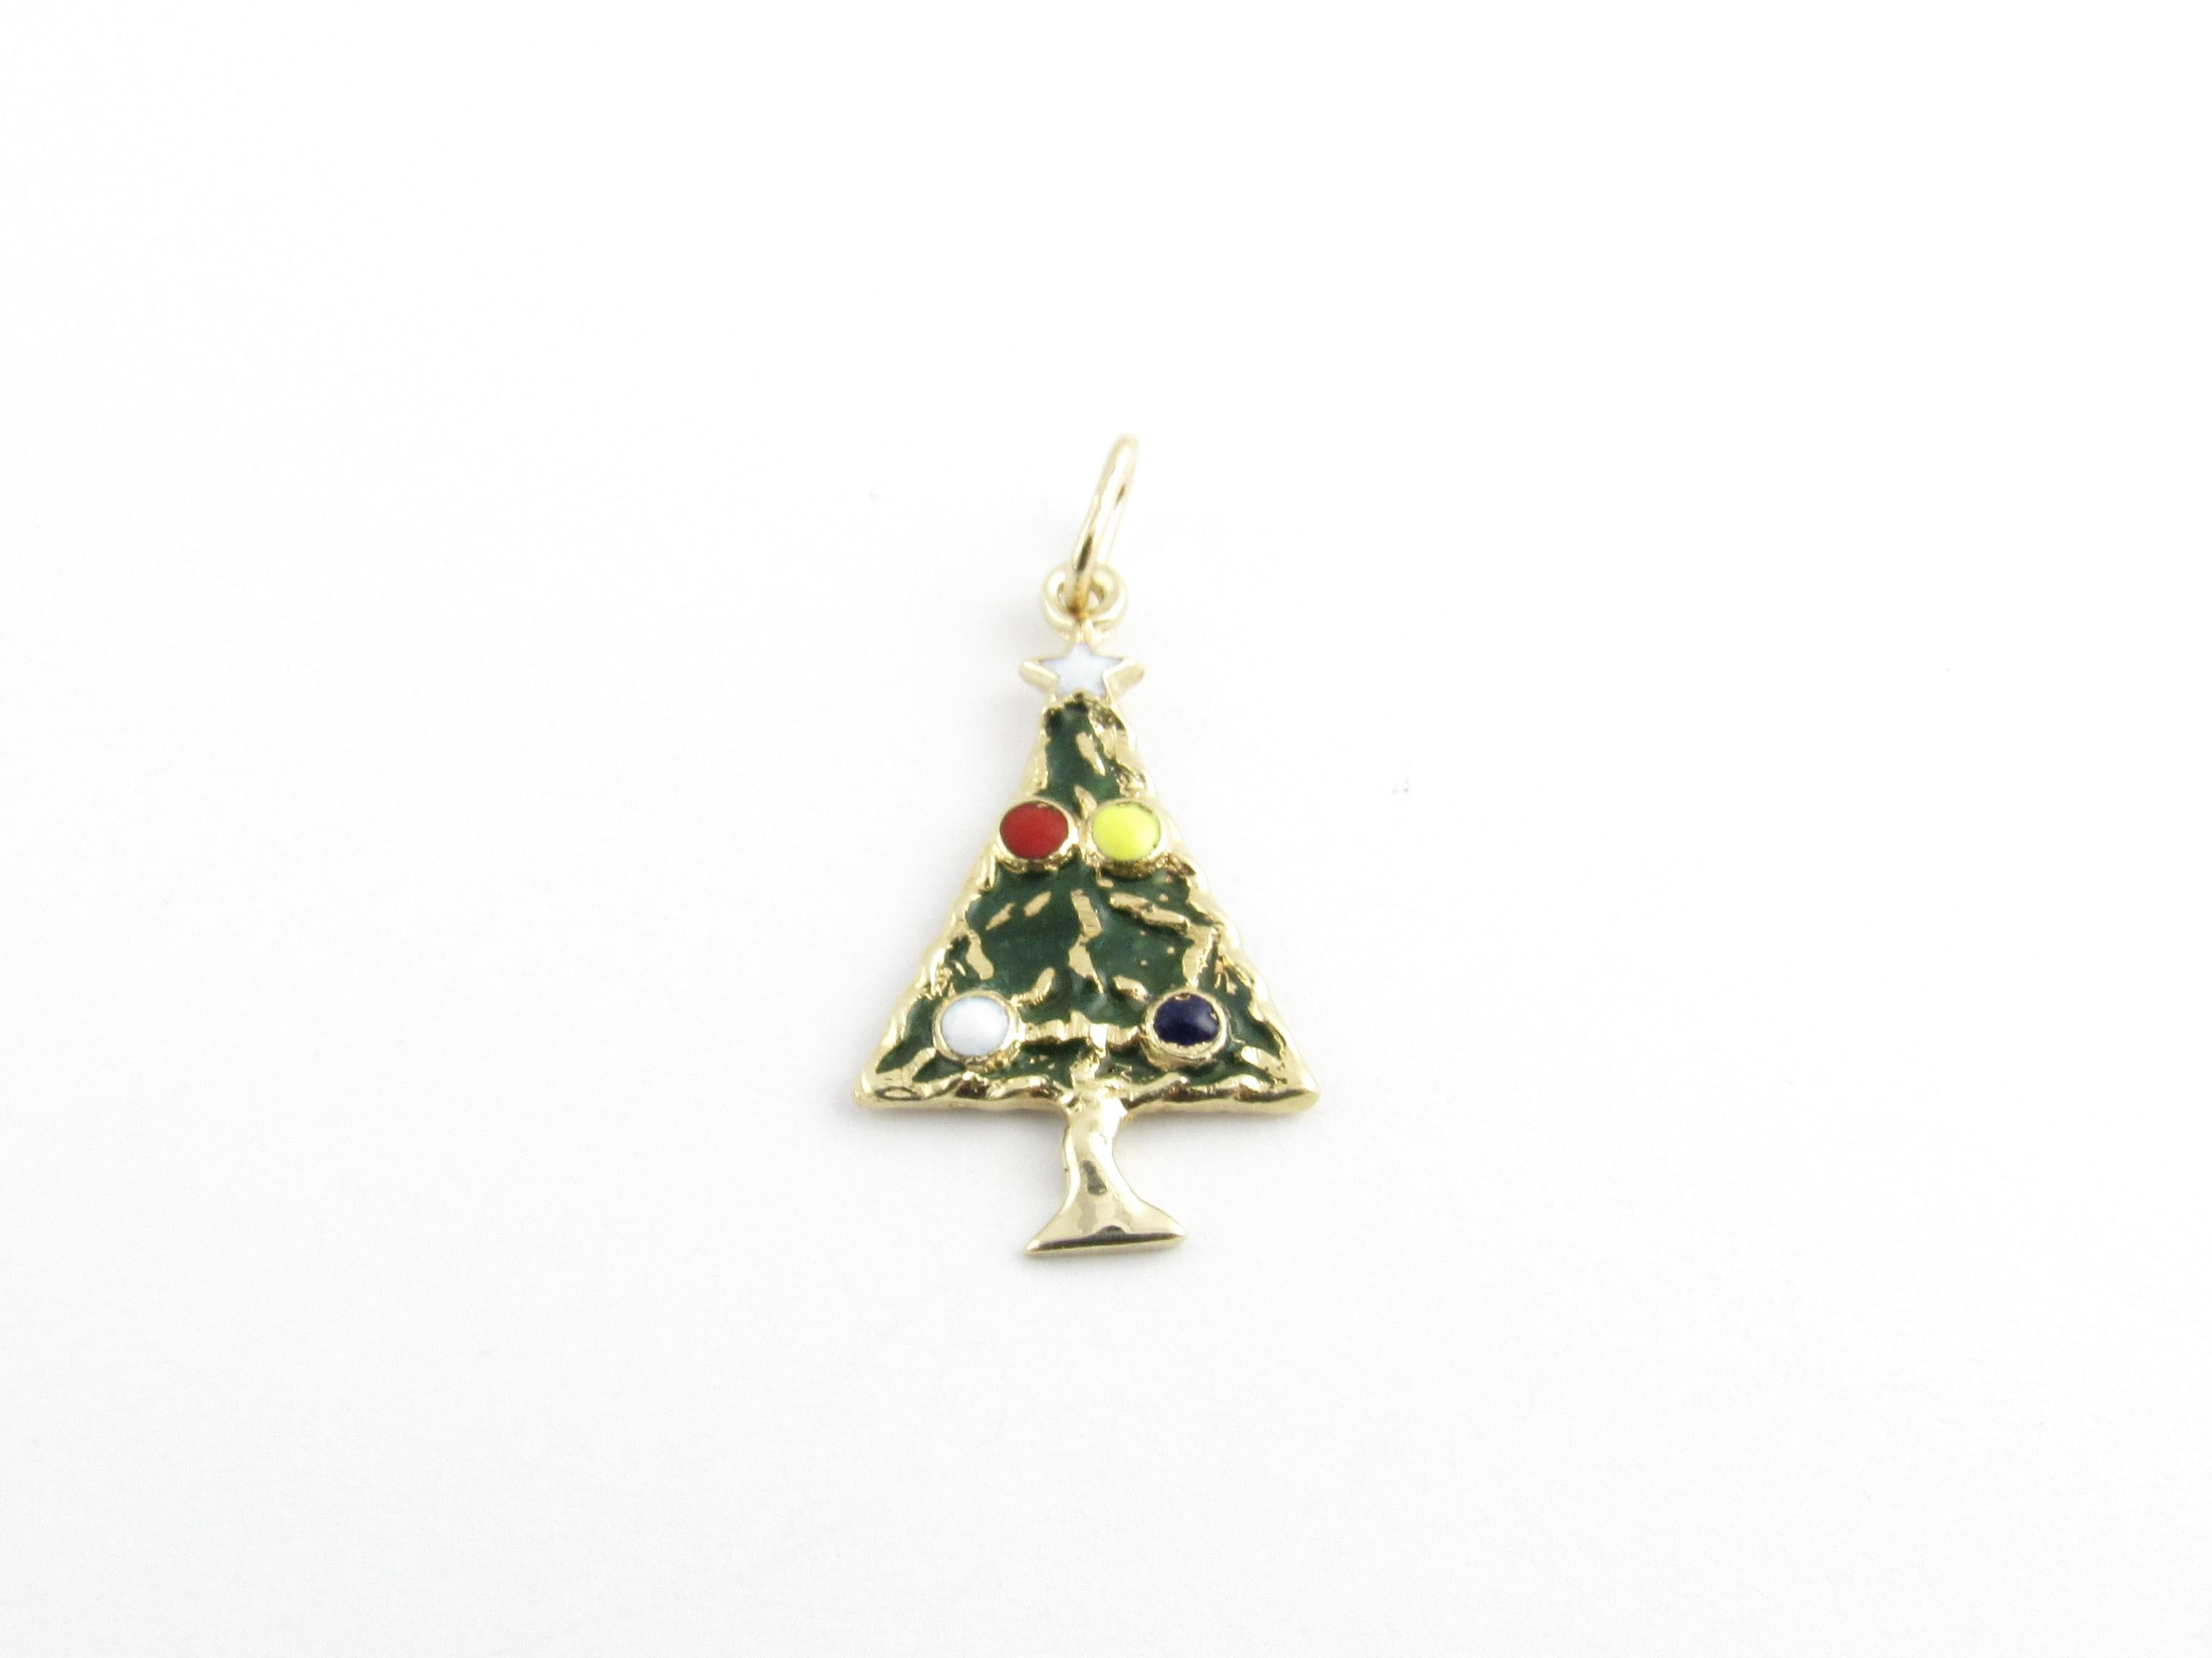 Vintage 14 Karat Yellow Gold and Enamel Christmas Tree Charm

Get in the holiday spirit!

This lovely charm features a beautifully detailed Christmas tree decorated with colorful enamel. Crafted in classic 14K yellow gold.

Size: 24 mm x 13 mm